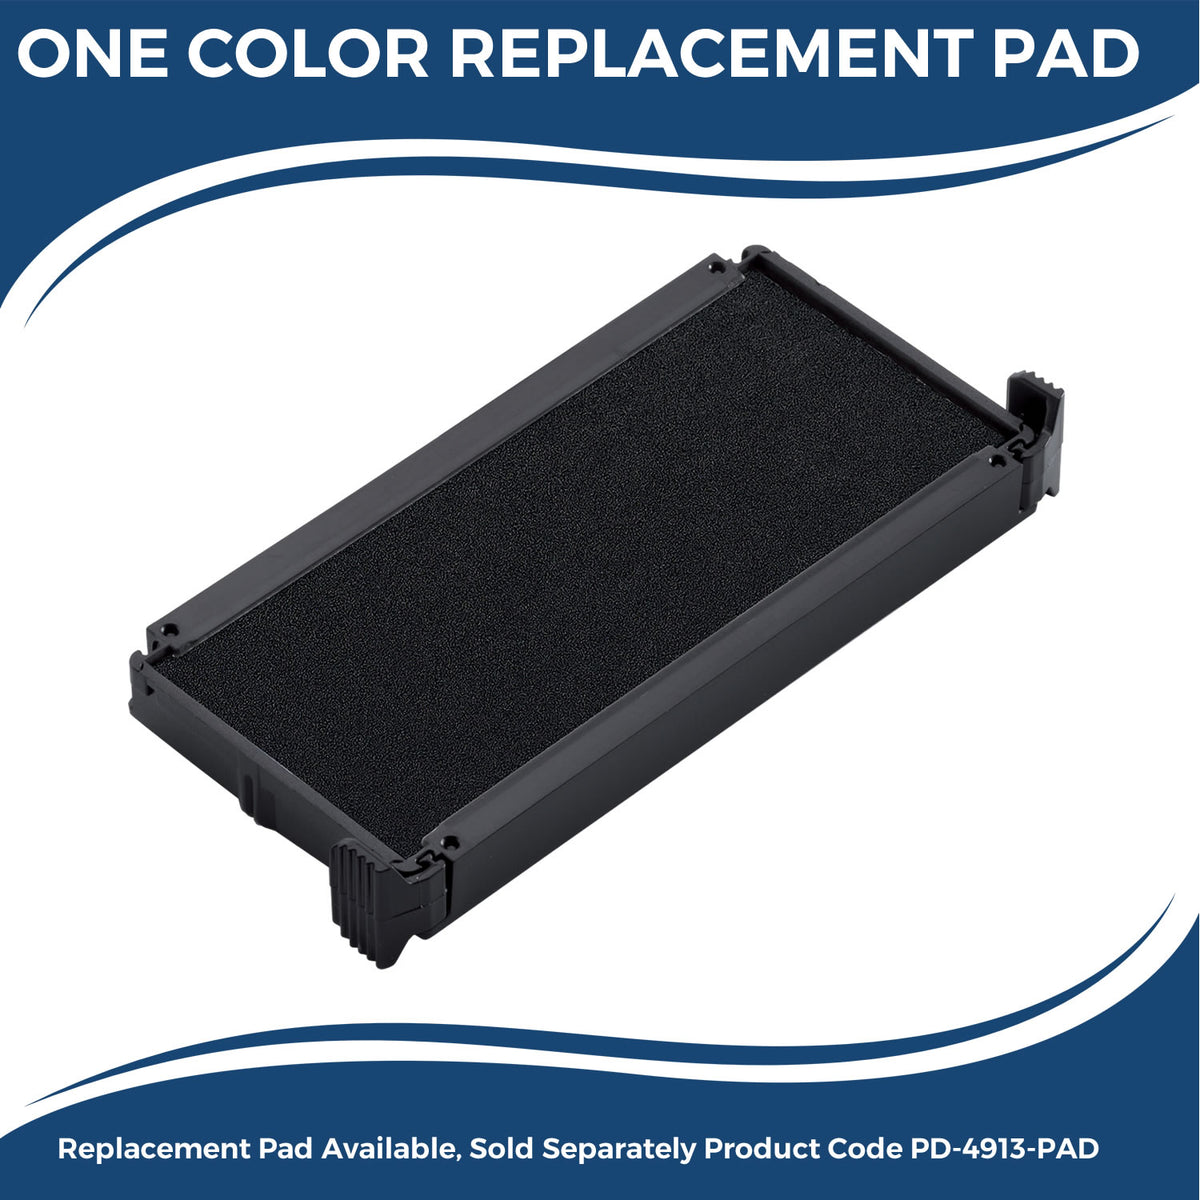 Large Self Inking Advance Directive Stamp 4528S Large Replacment Pad